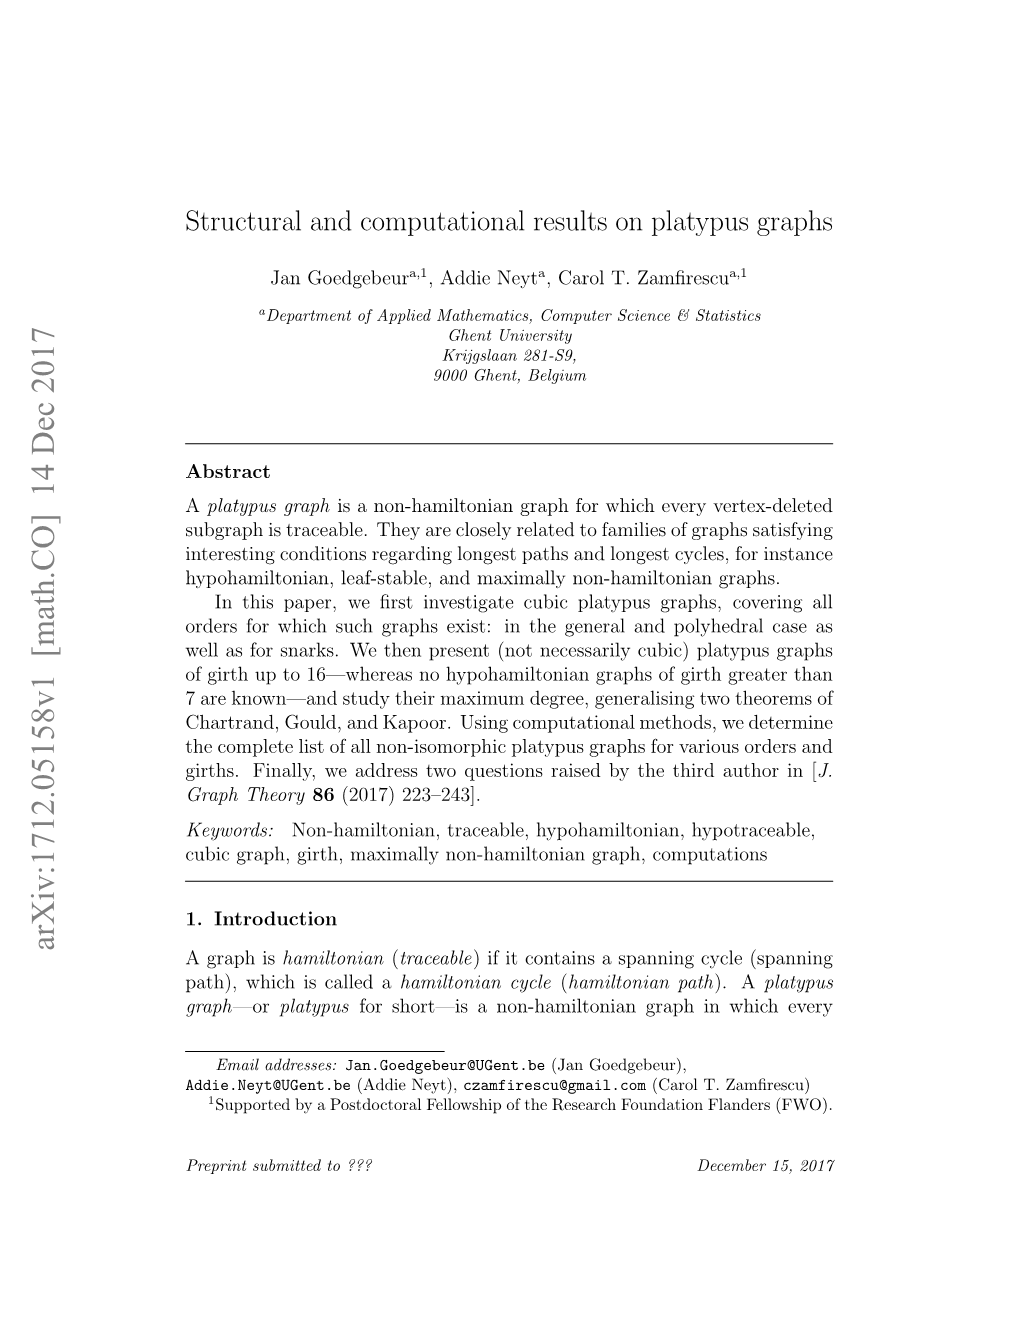 Structural and Computational Results on Platypus Graphs